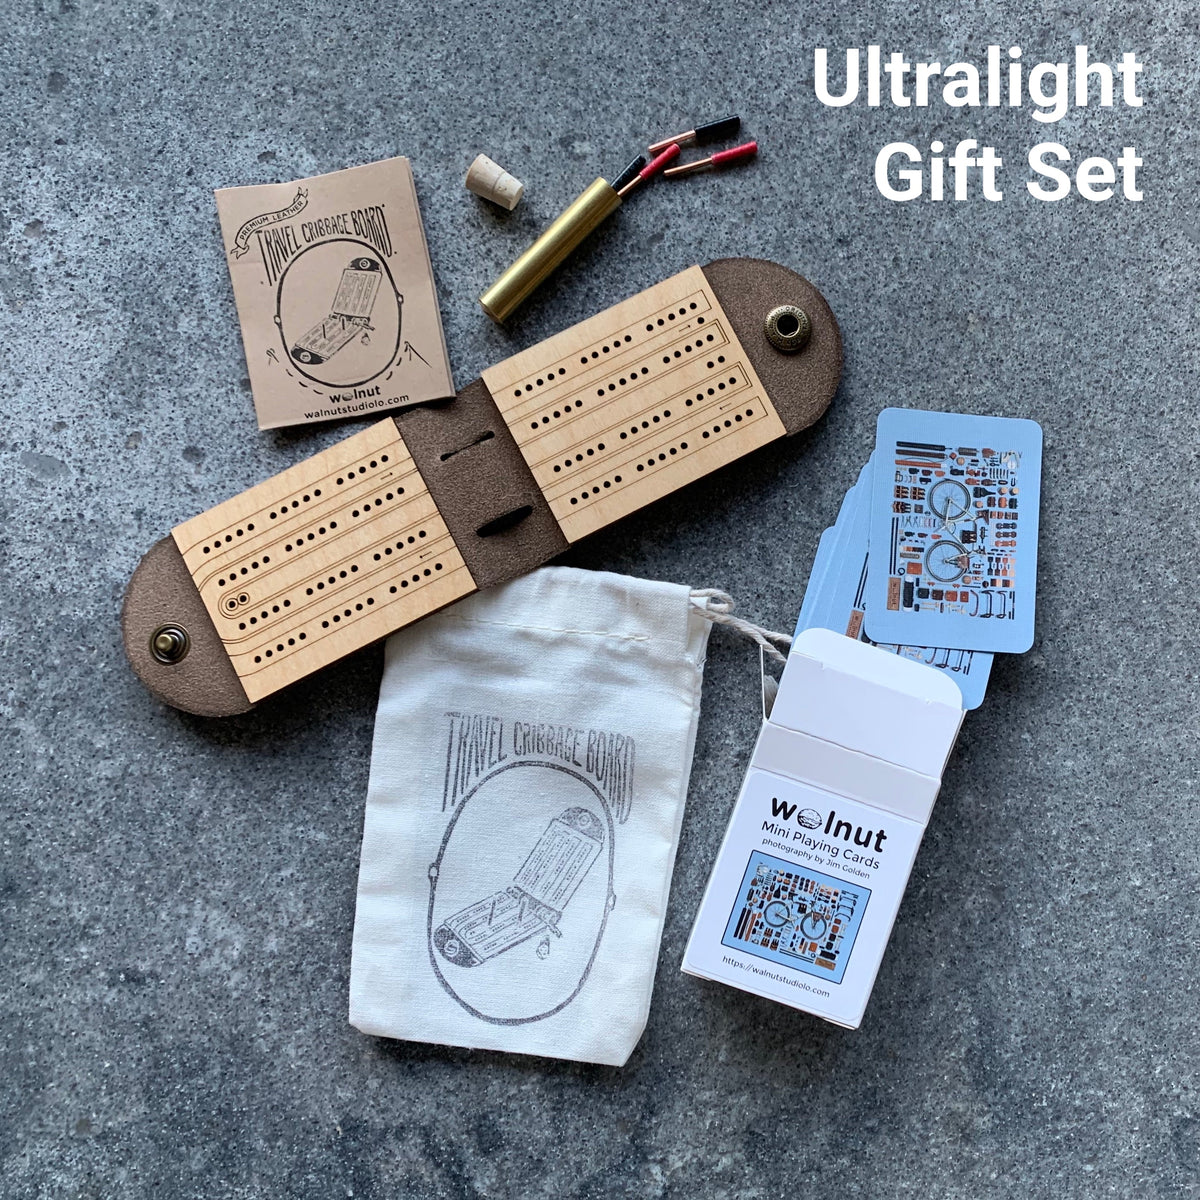 Open leather and wood travel cribbage board with wire metal pegs on a tabletop with a carrying pouch and a half-sized deck of cards, which is the &quot;Ultralight Gift Set&quot;